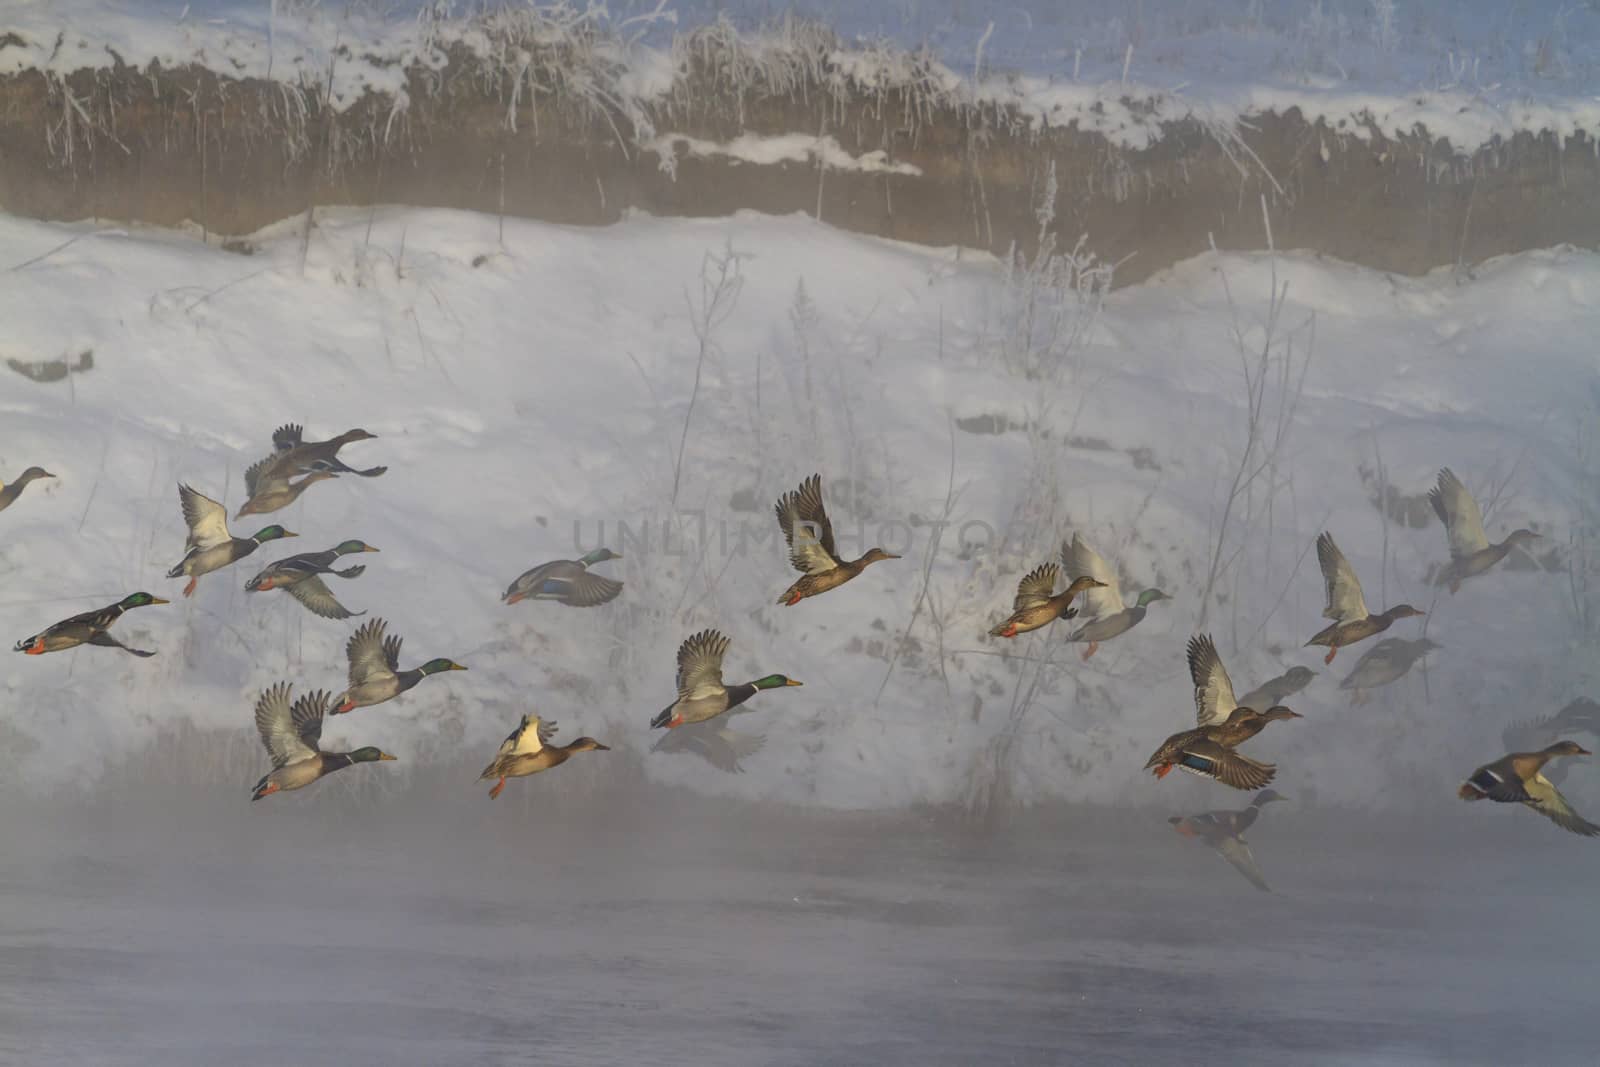 Mallard flock takes off with winter river at sunrise in fog,migration and wintering birds to ban hunting